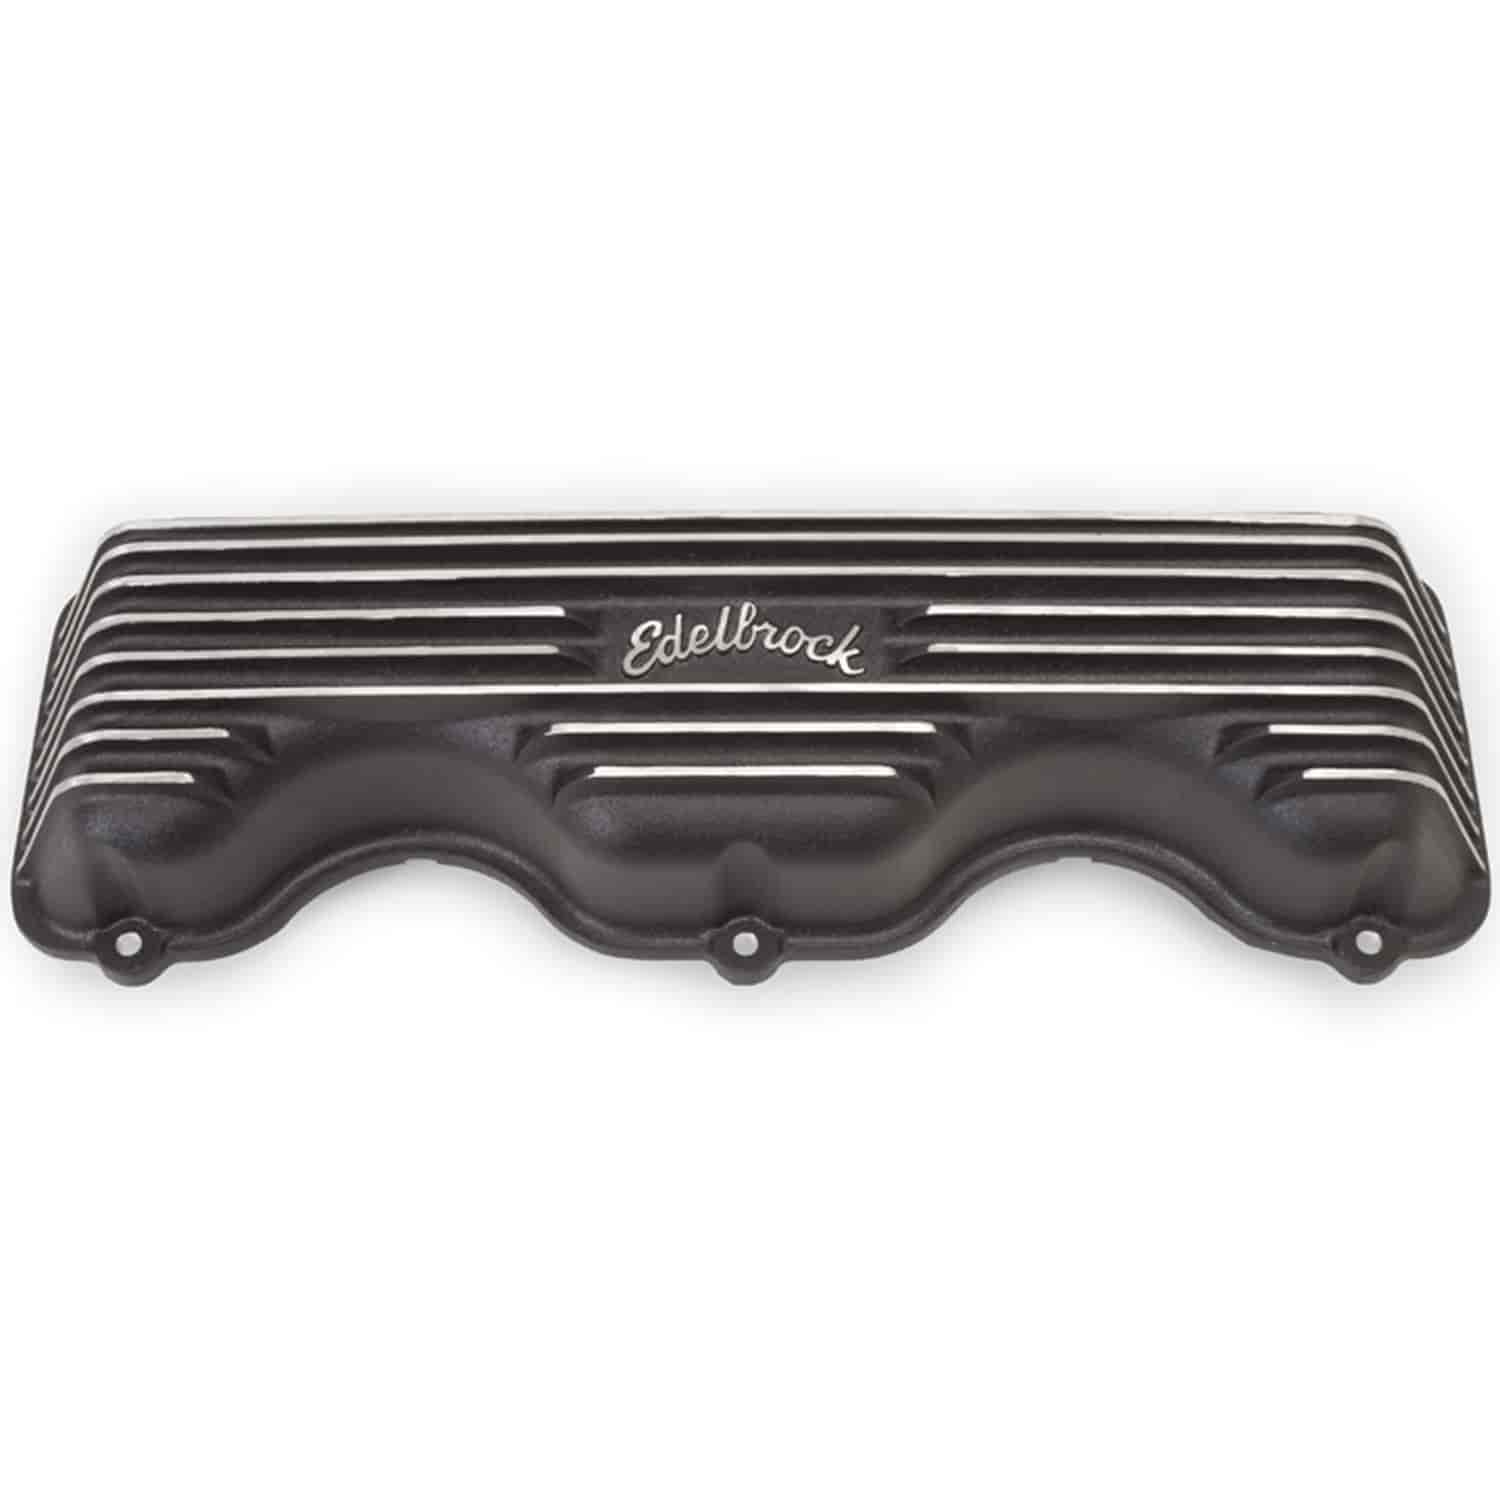 Classic Finned Valve Covers for Chevy W-Series 348/409 with Black Powder Coated Finish